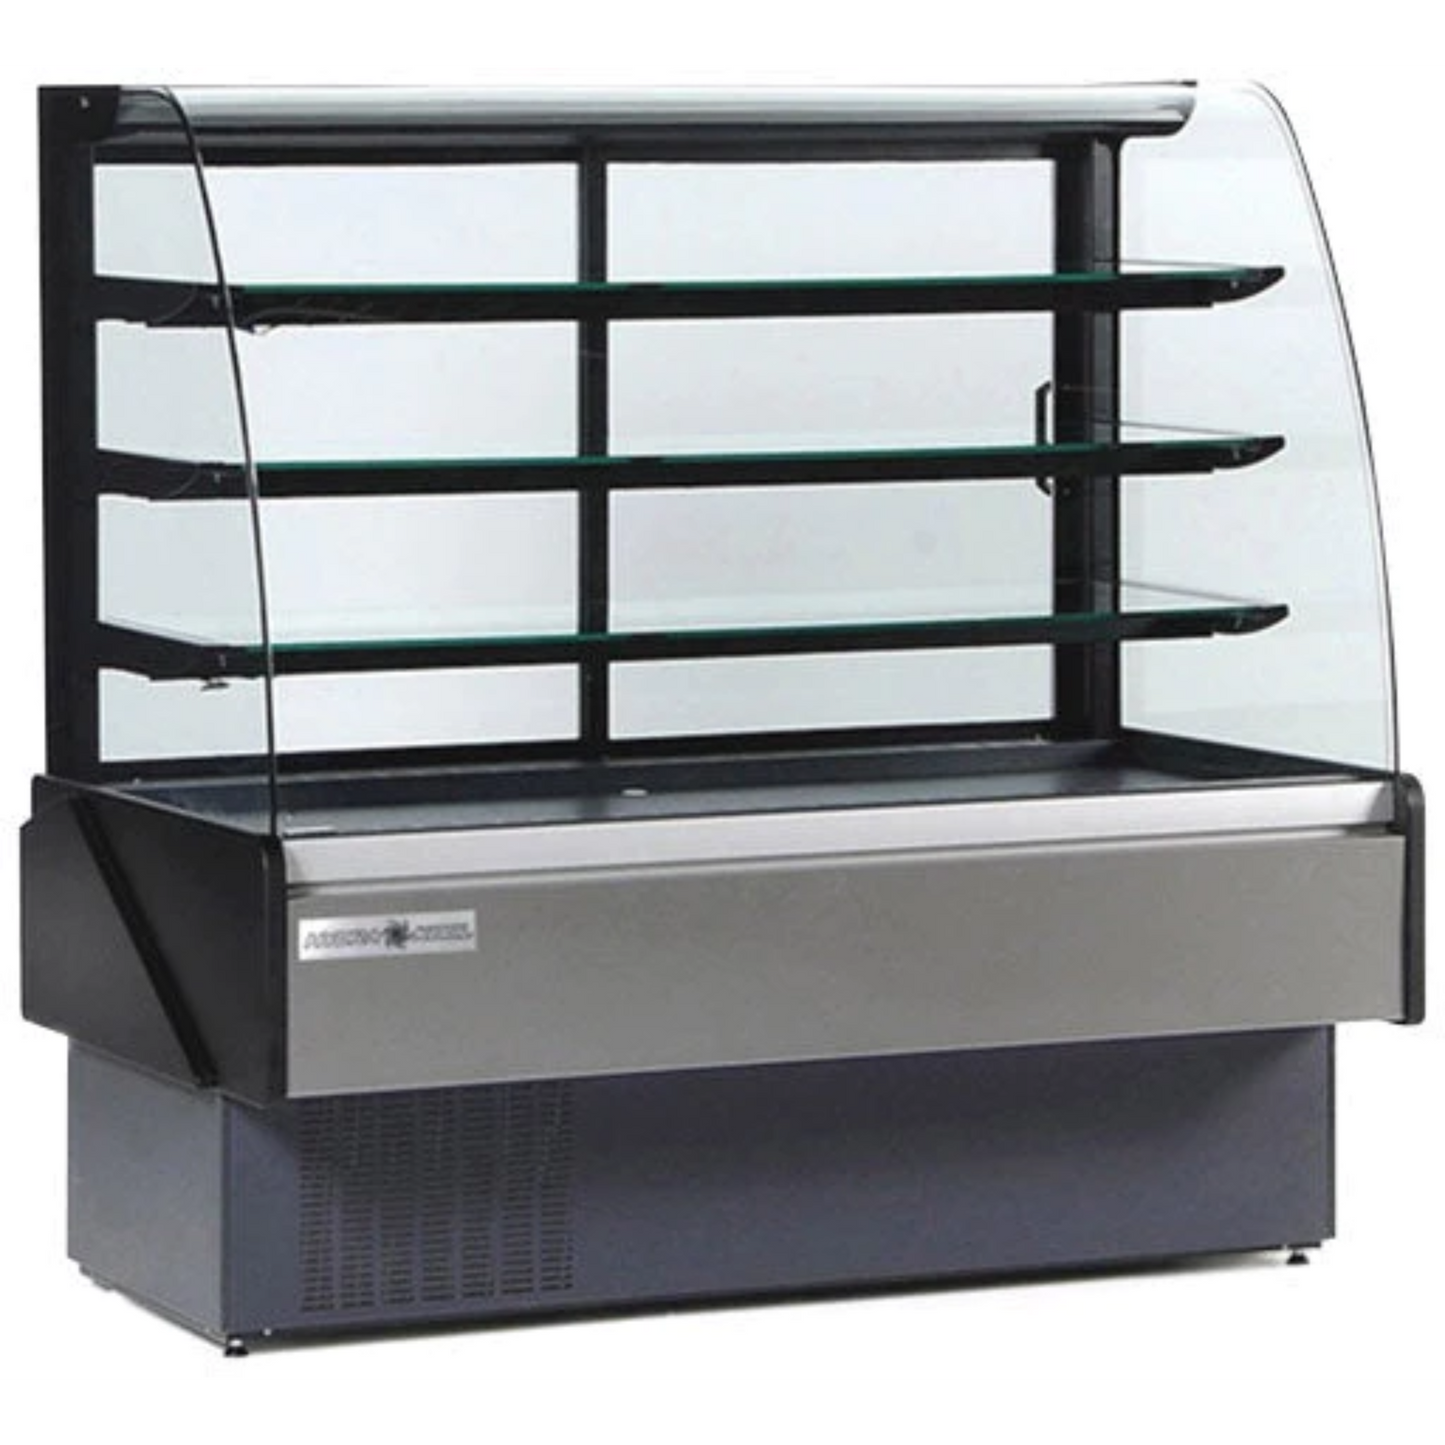 Hydra-Kool KBD-CG-50-S 50" Curved Glass Bakery Deli Case Self-Contained